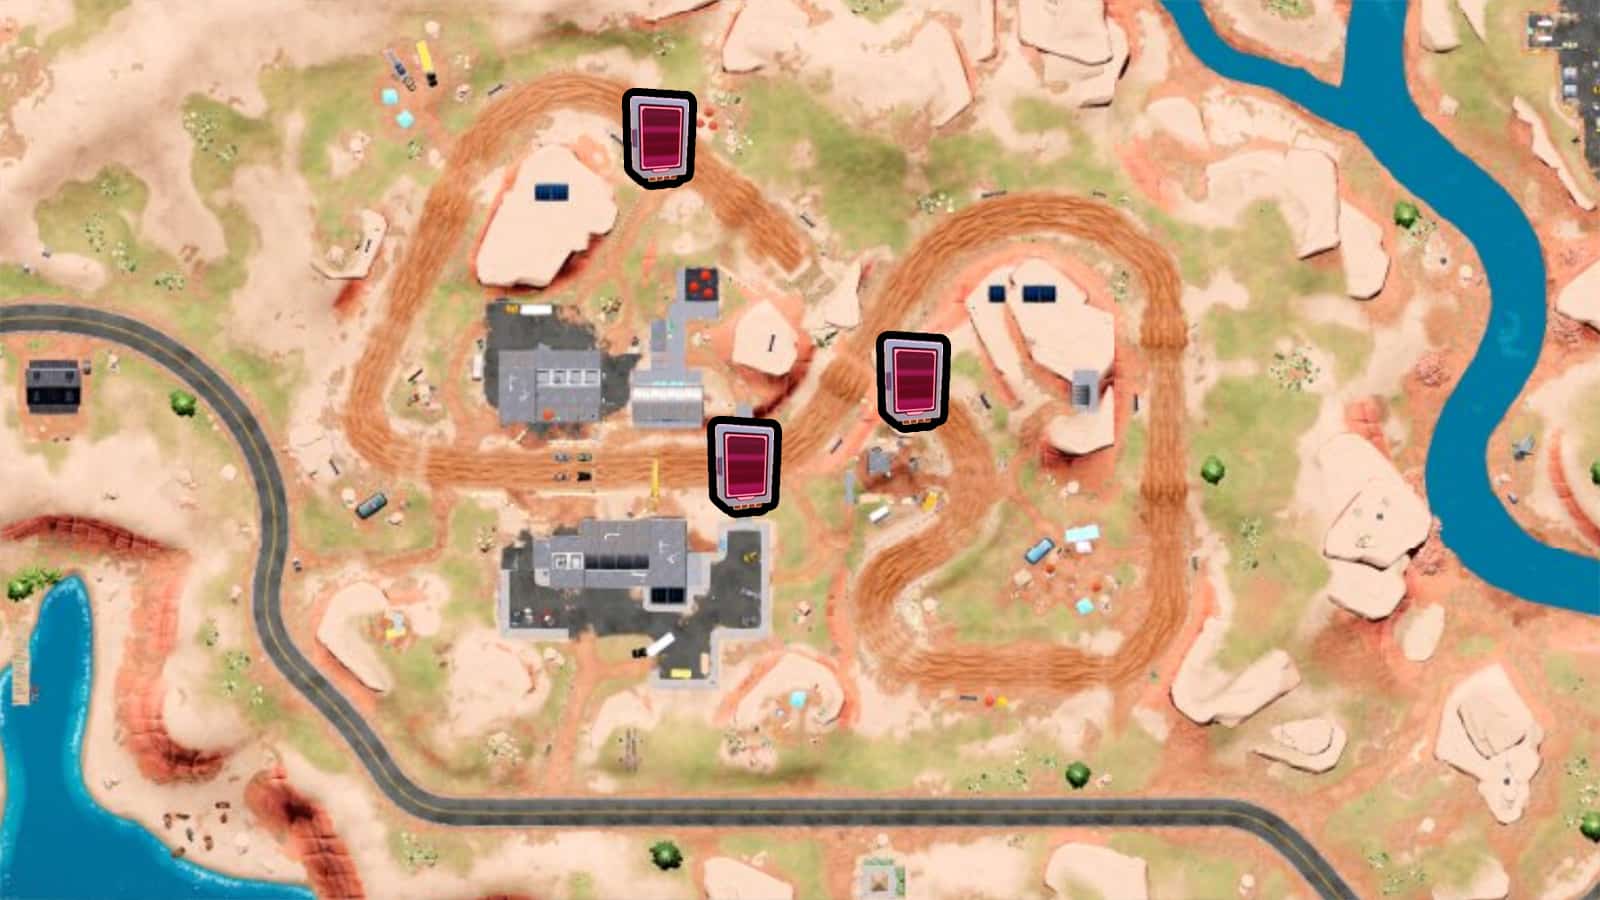 Omni Chip locations at Chonker's Speedway in Fortnite